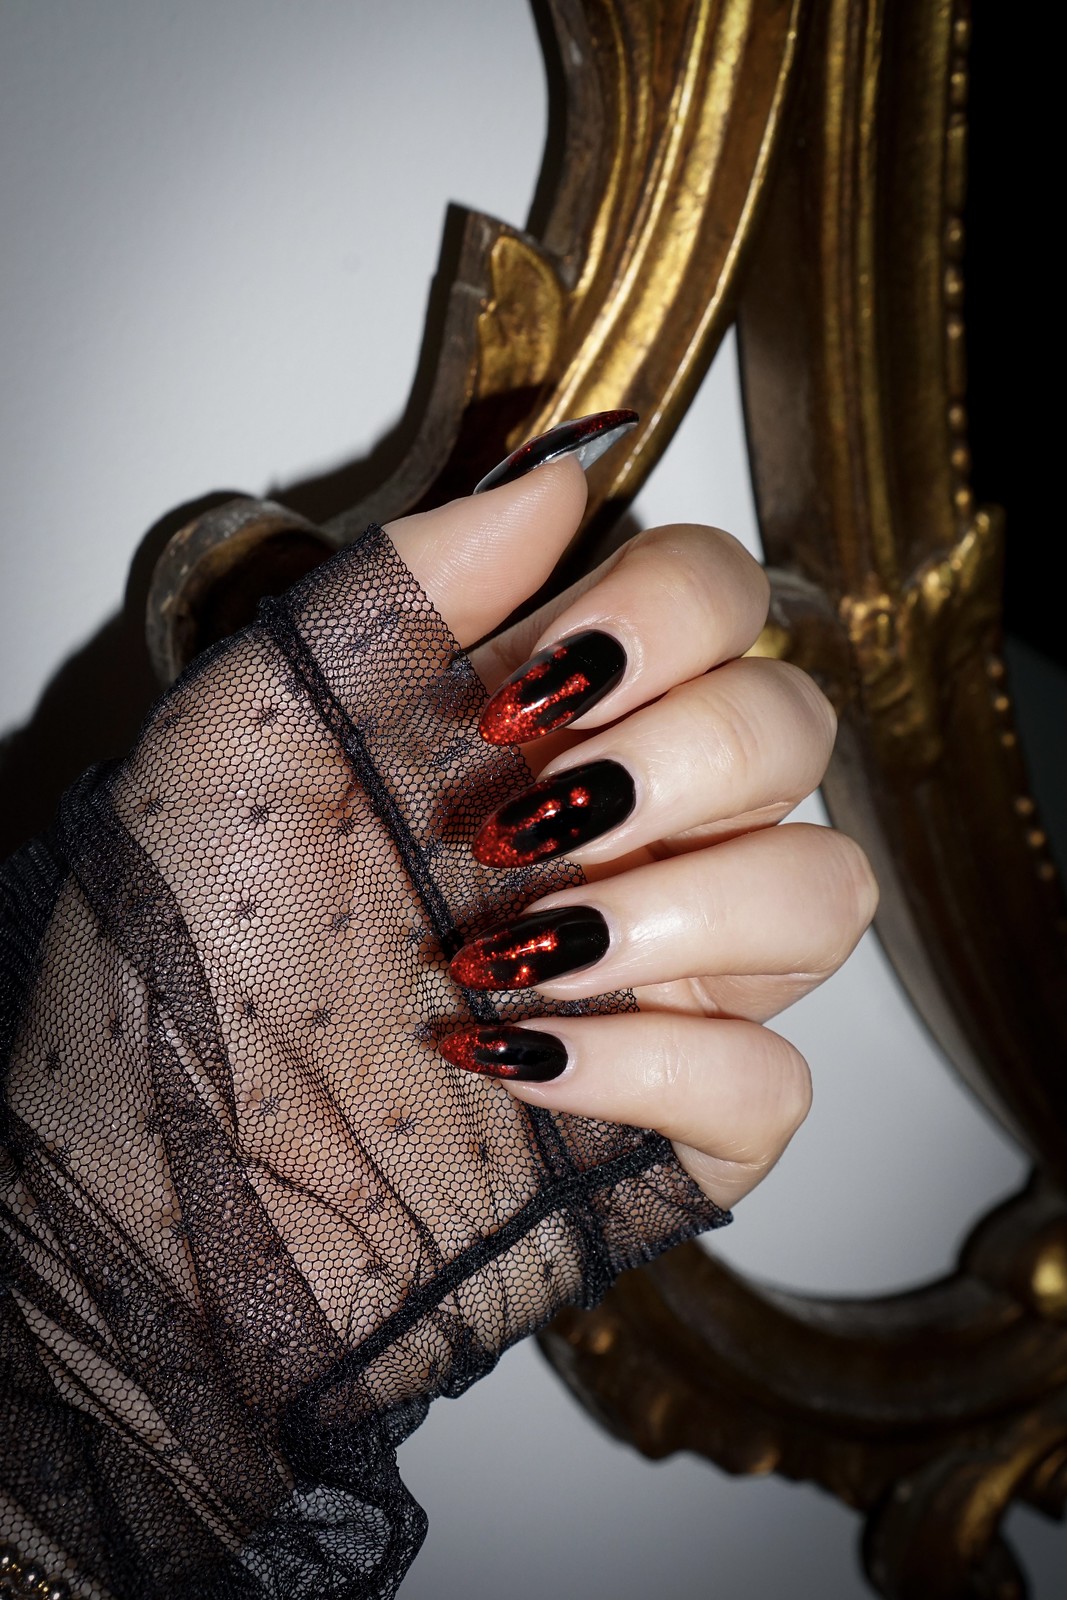 Red Glitter Blood Dripping Nails | Blood Nails | Black and Red Blood Nails | Best Halloween Nails | Trendy Nails | Halloween Nail Art | Acrylic Nails | October Nails | Spooky Nails | Manicure Ideas | Fall Nails 2022 | Halloween Nail Designs | Autumn Nails | Pretty Halloween Nails